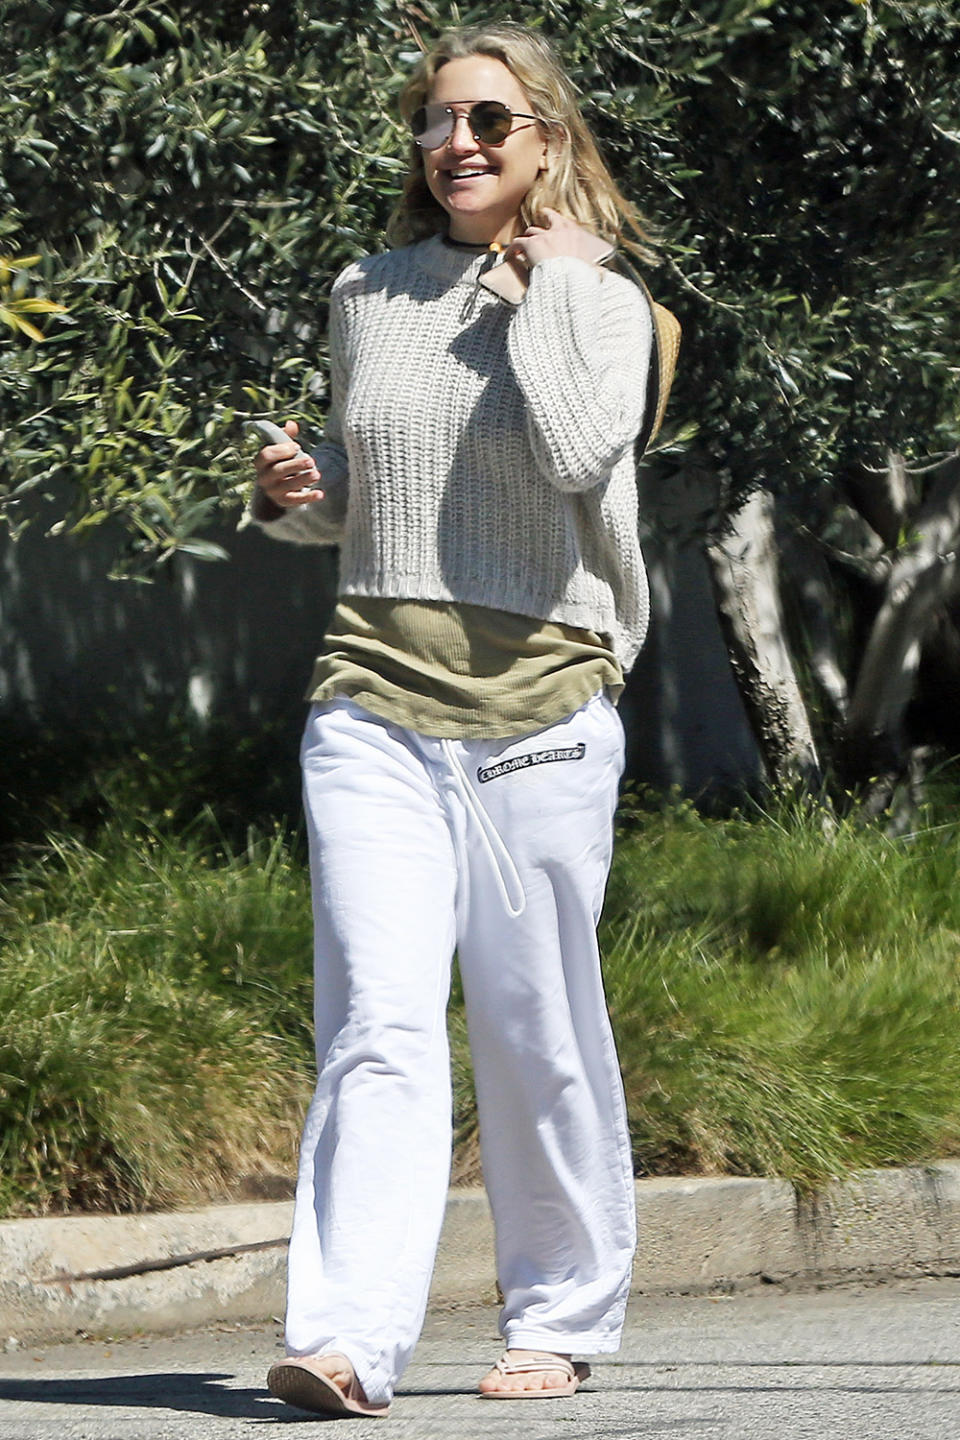 <p>Kate Hudson keeps it cozy while soaking up some sunshine on a walk on Friday in Los Angeles.</p>